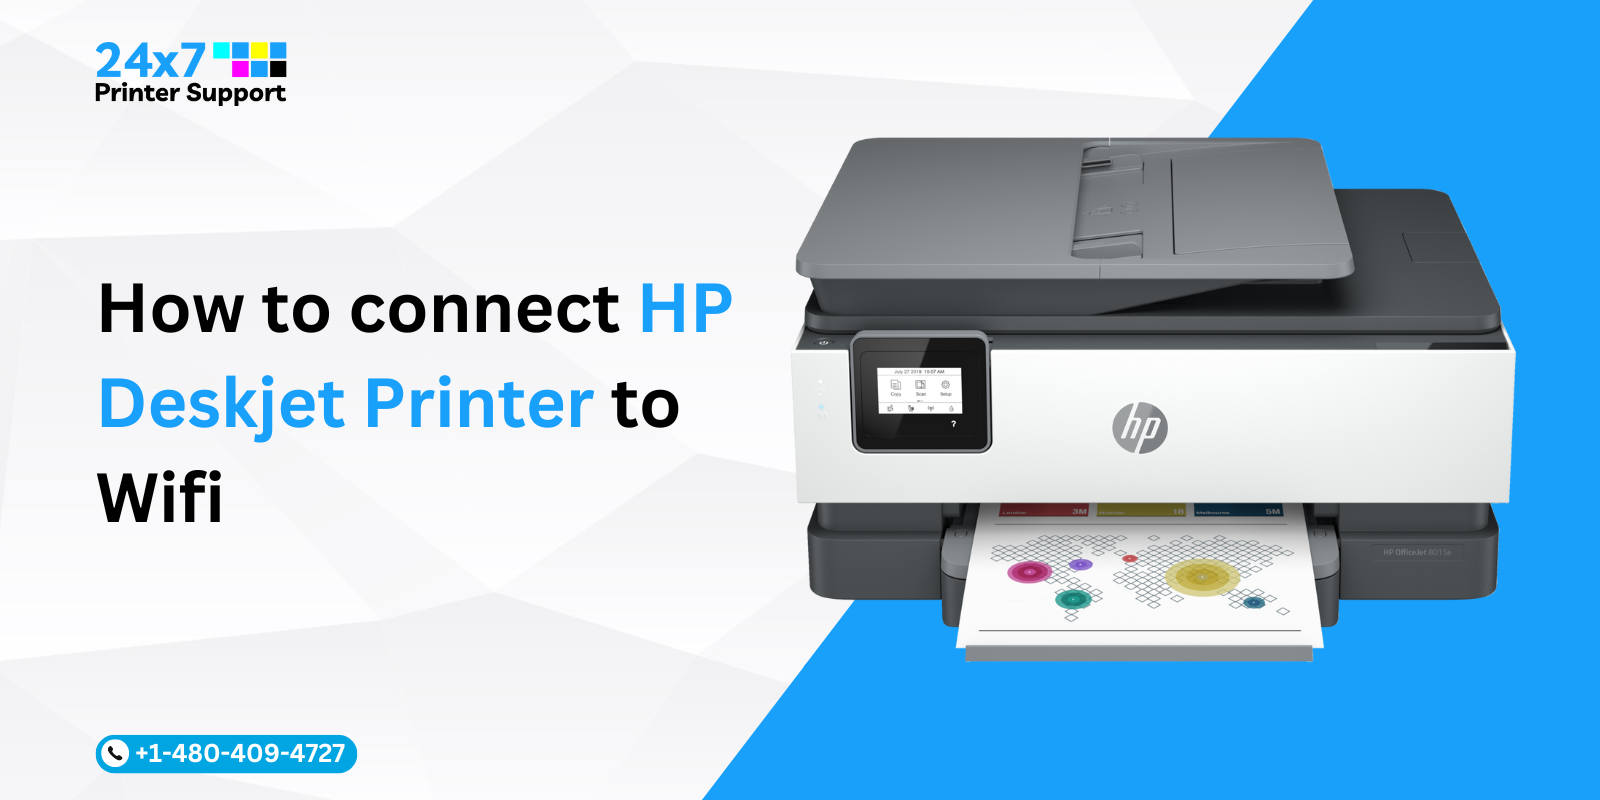 How to connect HP Deskjet Printer to Wifi